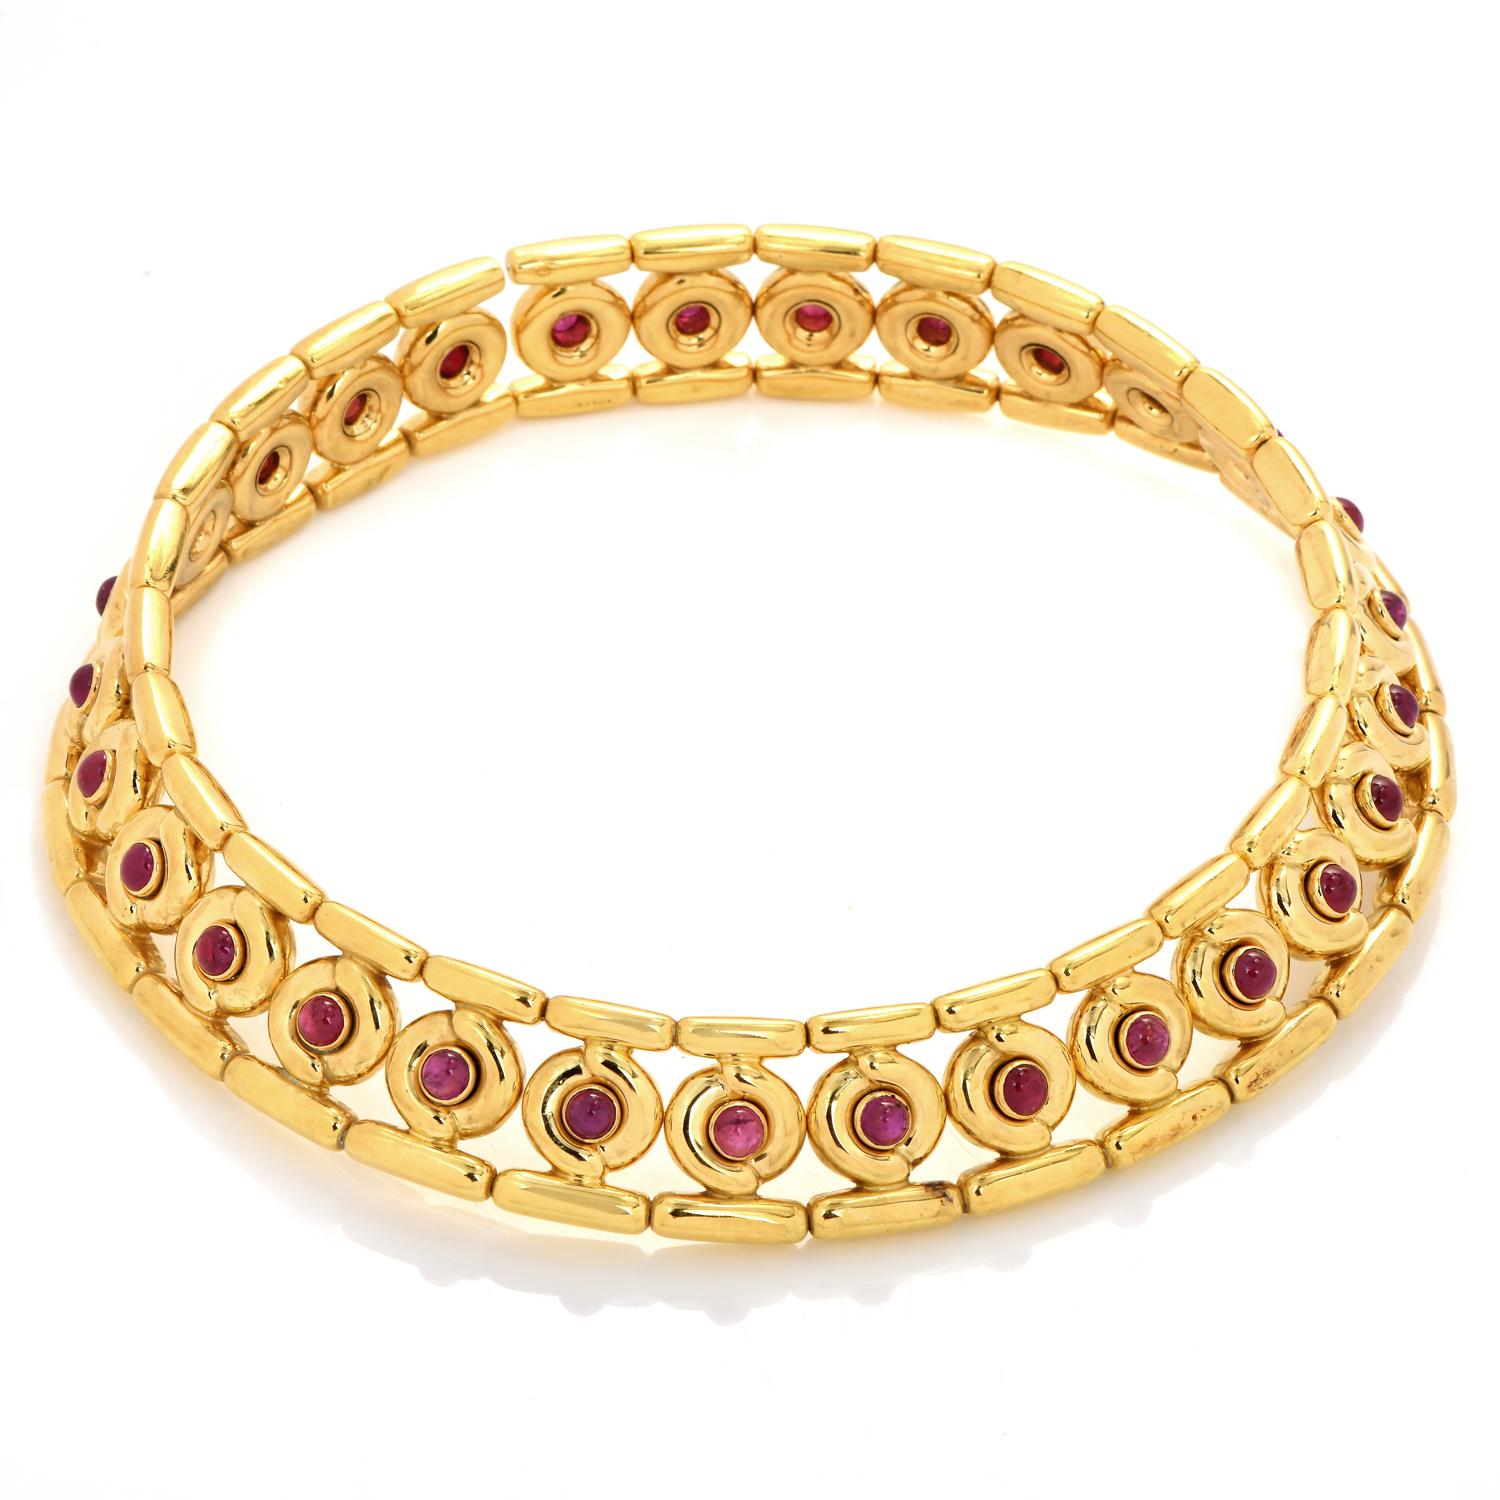 An exquisite Italian-made by Faraone Milano Ruby jewelry with a spectacular cuff collar link necklace.

Completely crafted in 18K Yellow Gold.
Necklace weight: 166.7 grams.
The necklace is 15